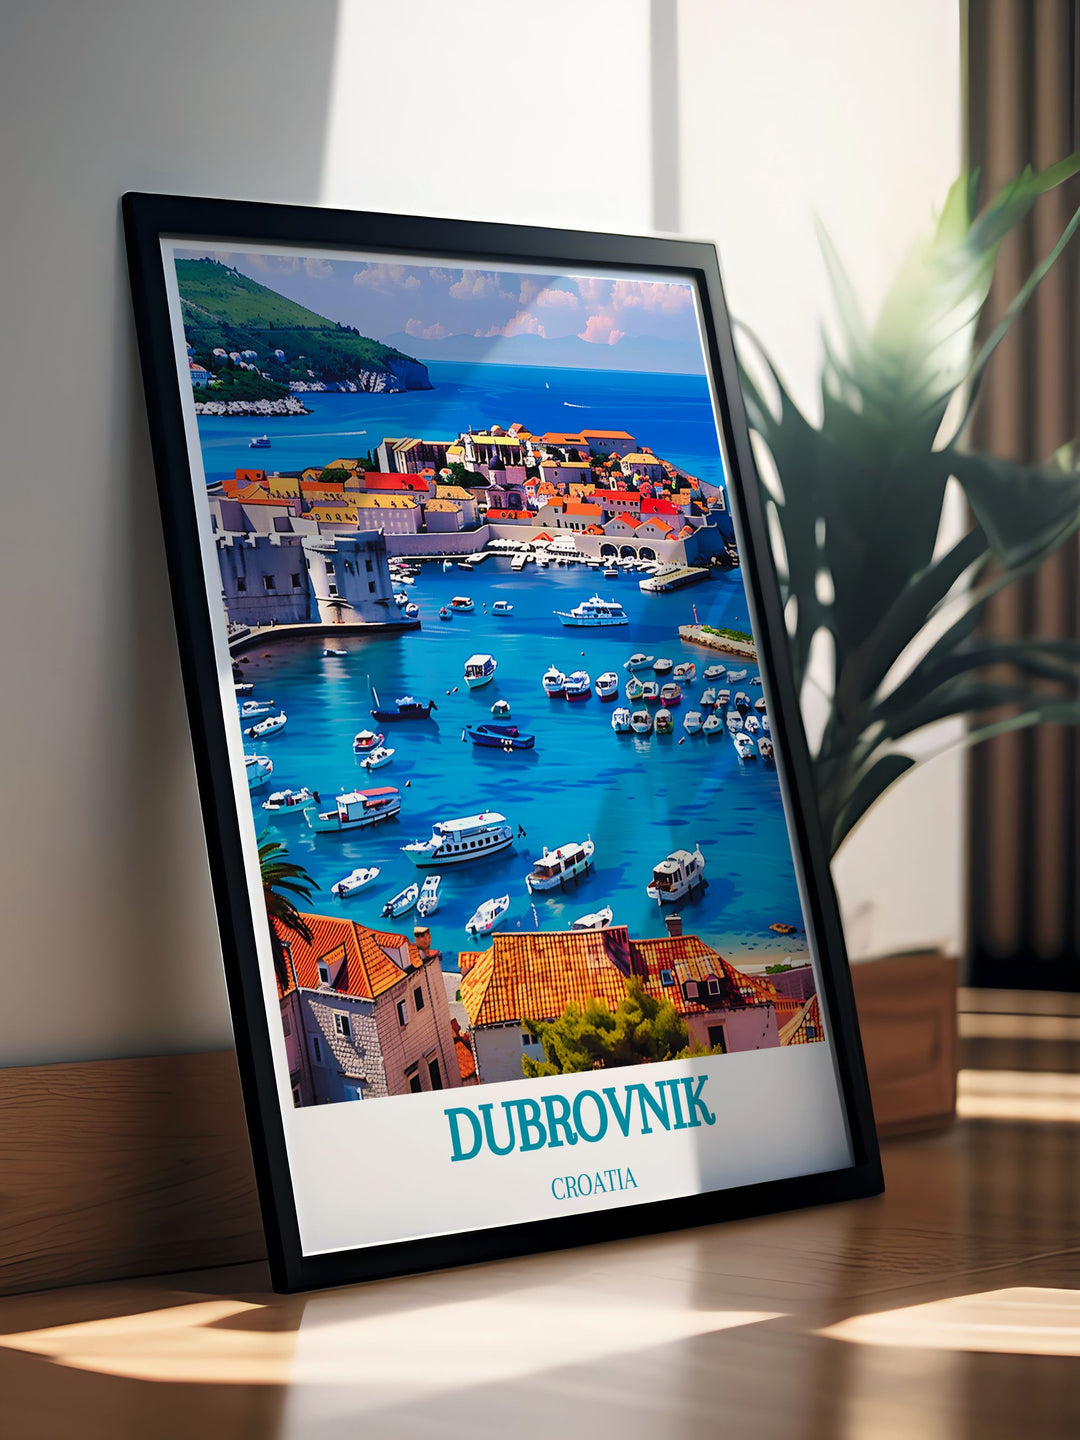 Gallery wall art illustrating the majestic landscapes of Dubrovniks Old Town Harbor, offering breathtaking views and historical depth.